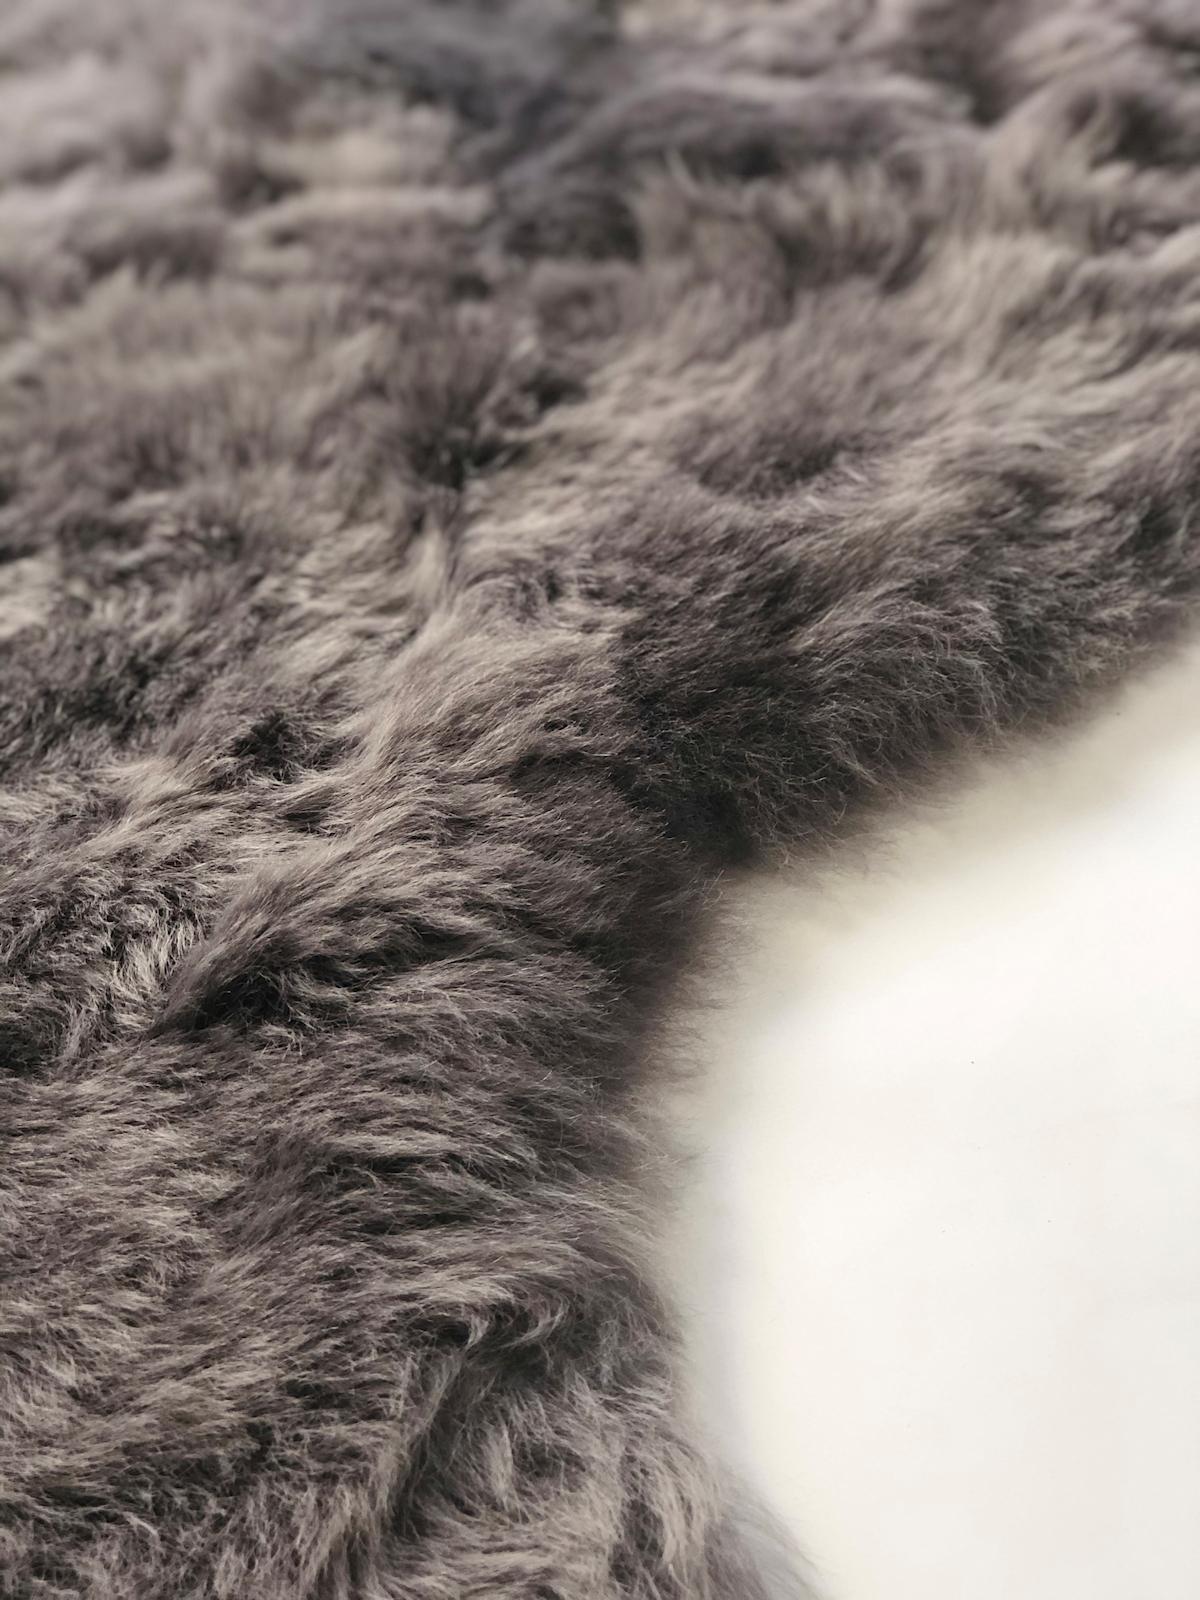 This large sheepskin throw rug will create an atmosphere of stylish design and luxurious comfort, handcrafted from the finest quality short wool Icelandic Sheepskin. This charming and endearing grey sheepskin throw rug expresses the beauty of